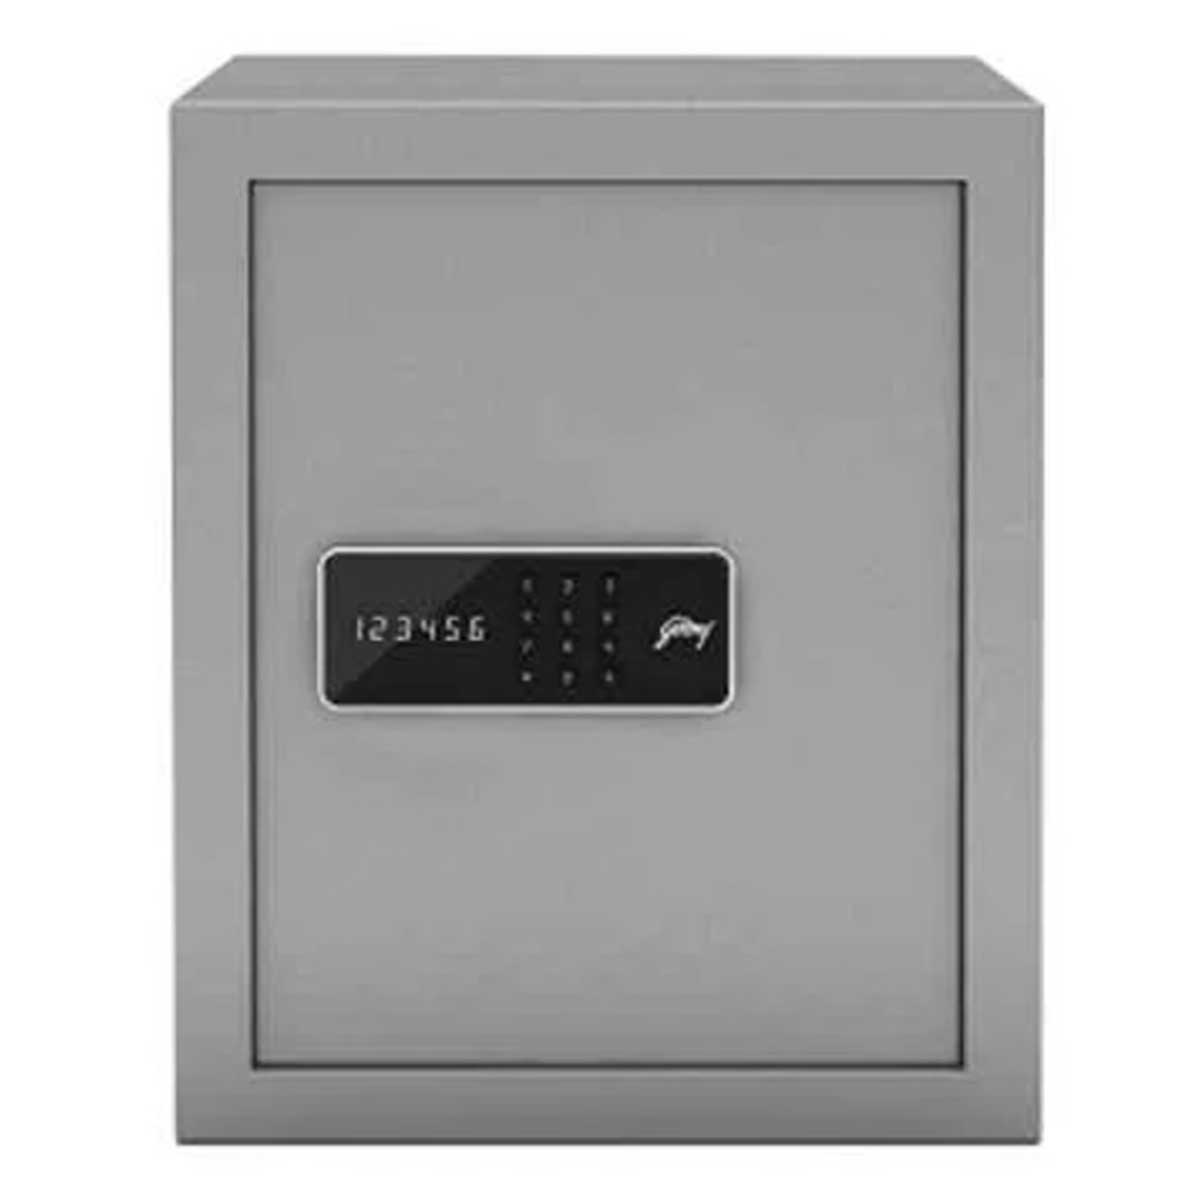 Steel security safe Manufacturers, Suppliers in Lawrence Road